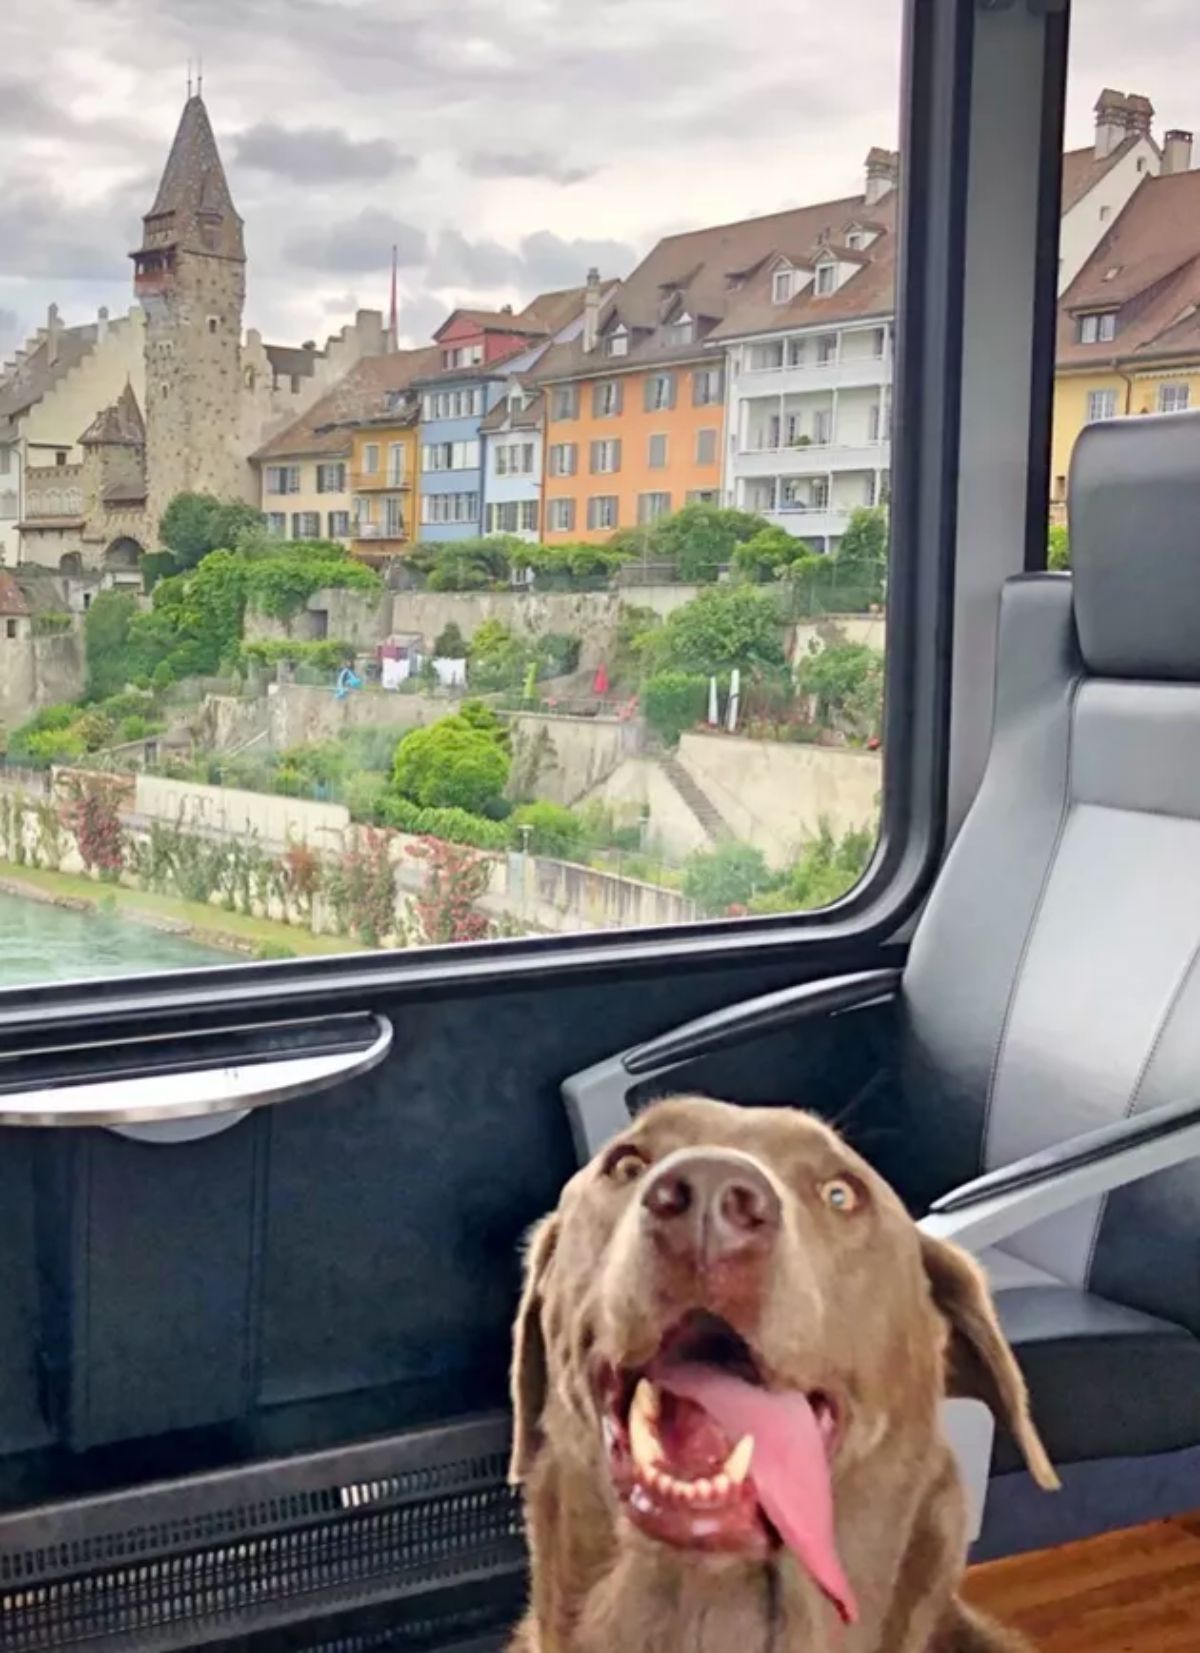 brown dog sitting on the floor inside a train